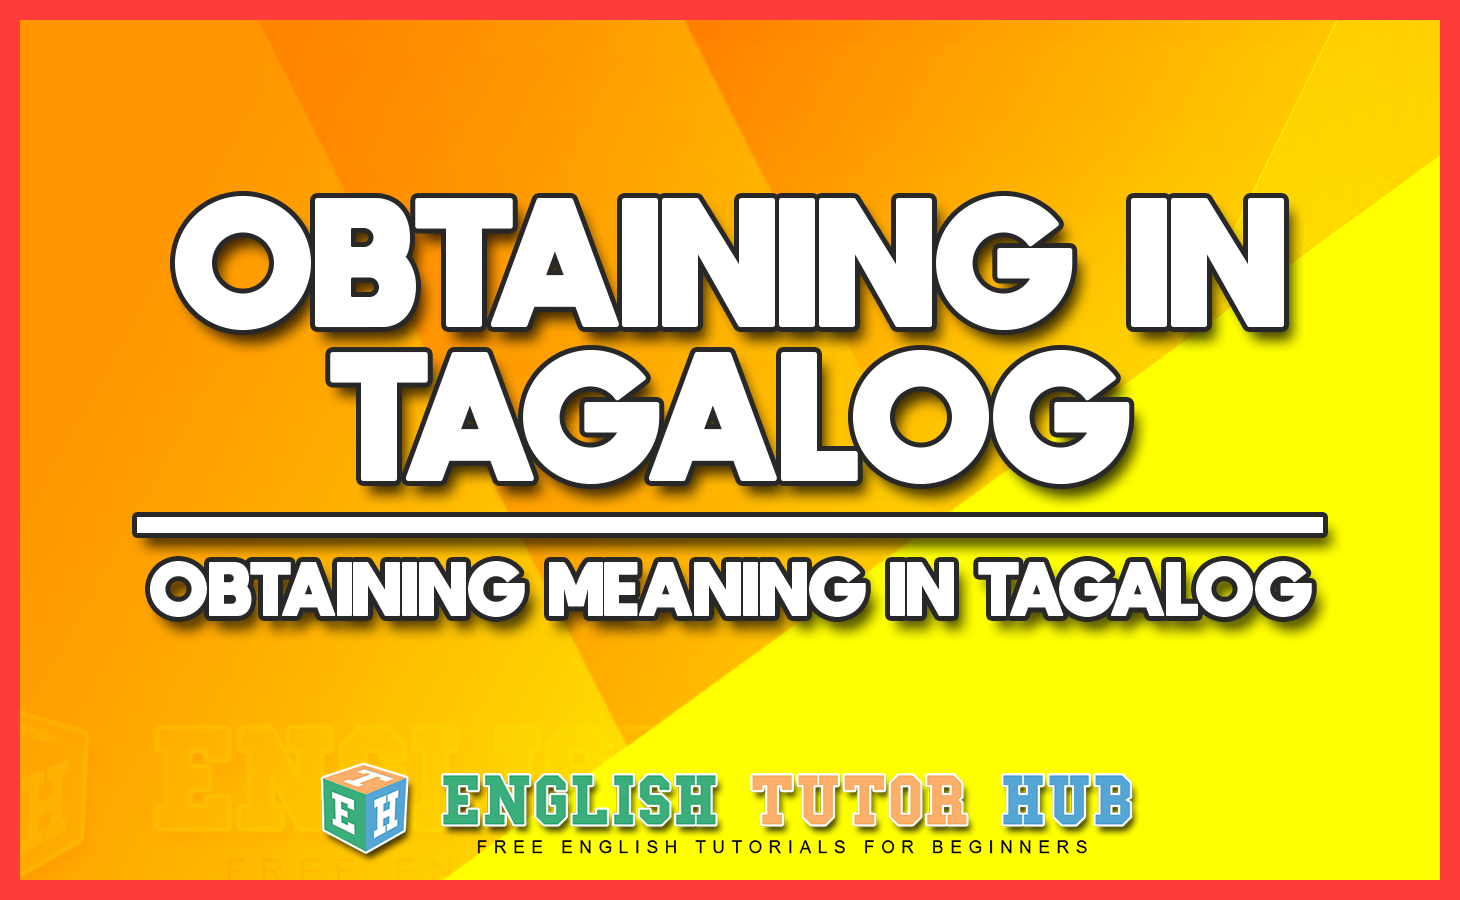 OBTAINING IN TAGALOG - OBTAINING MEANING IN TAGALOG